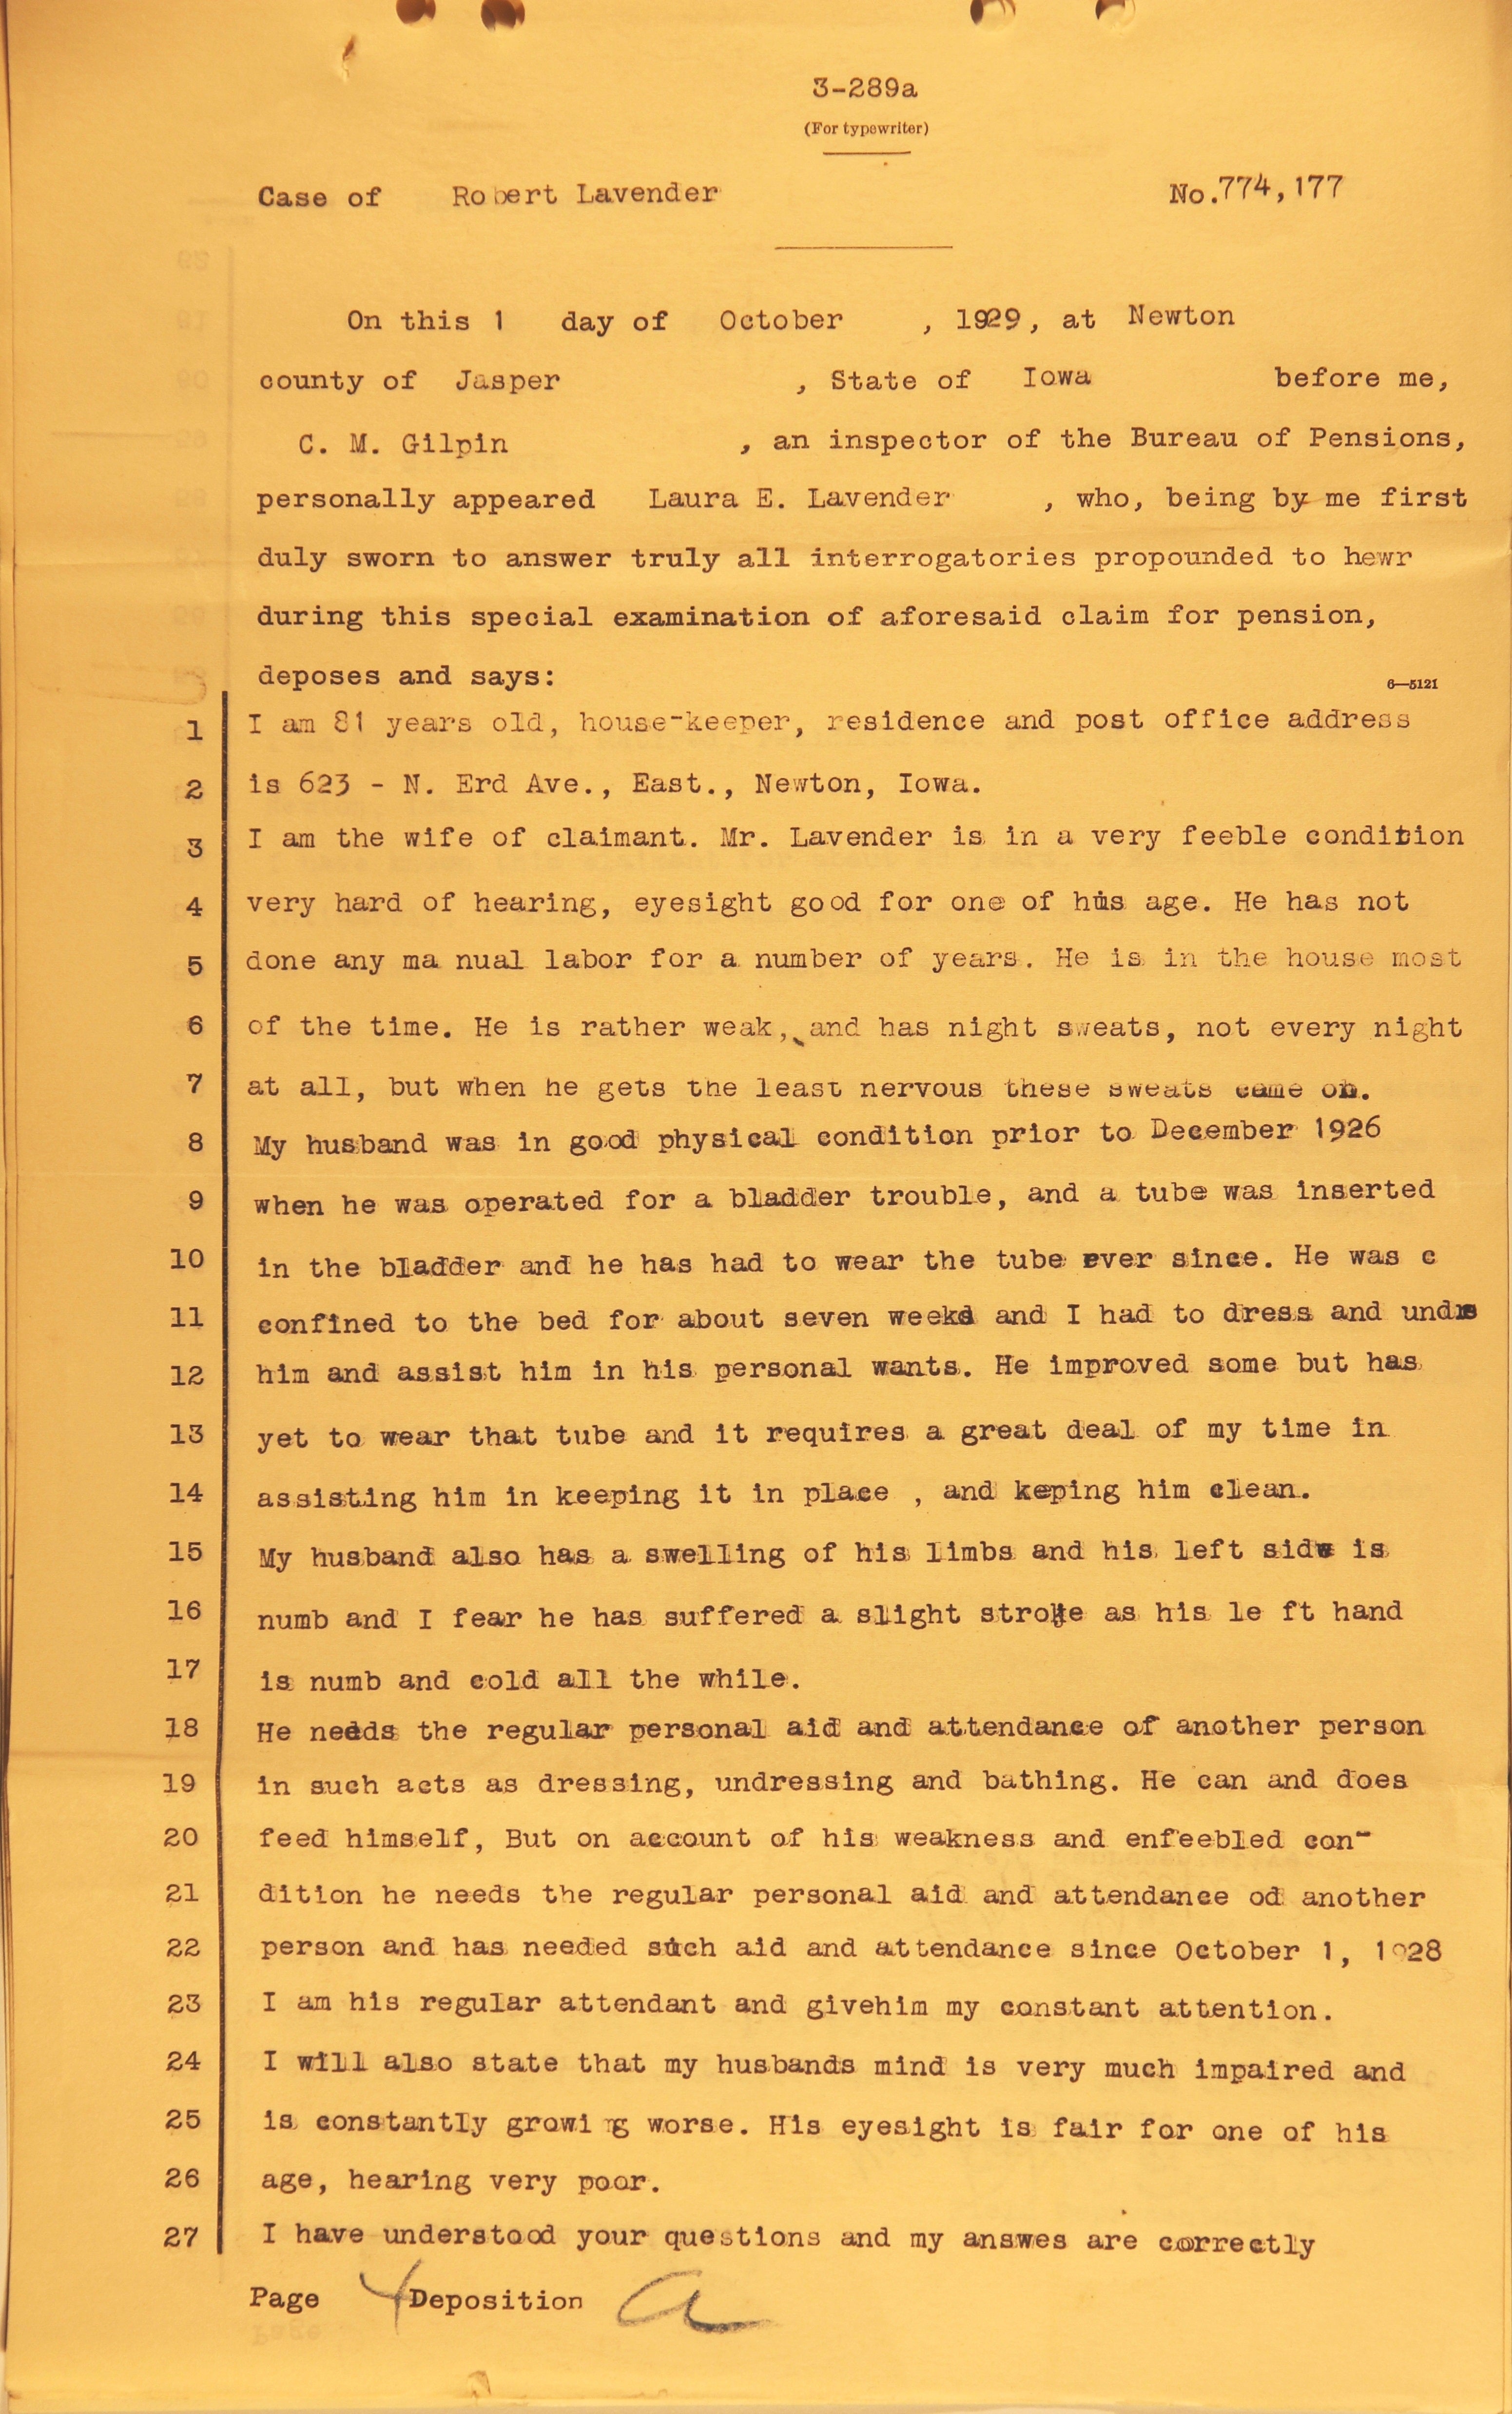 First page of depositions accompanying a recruit's pension application